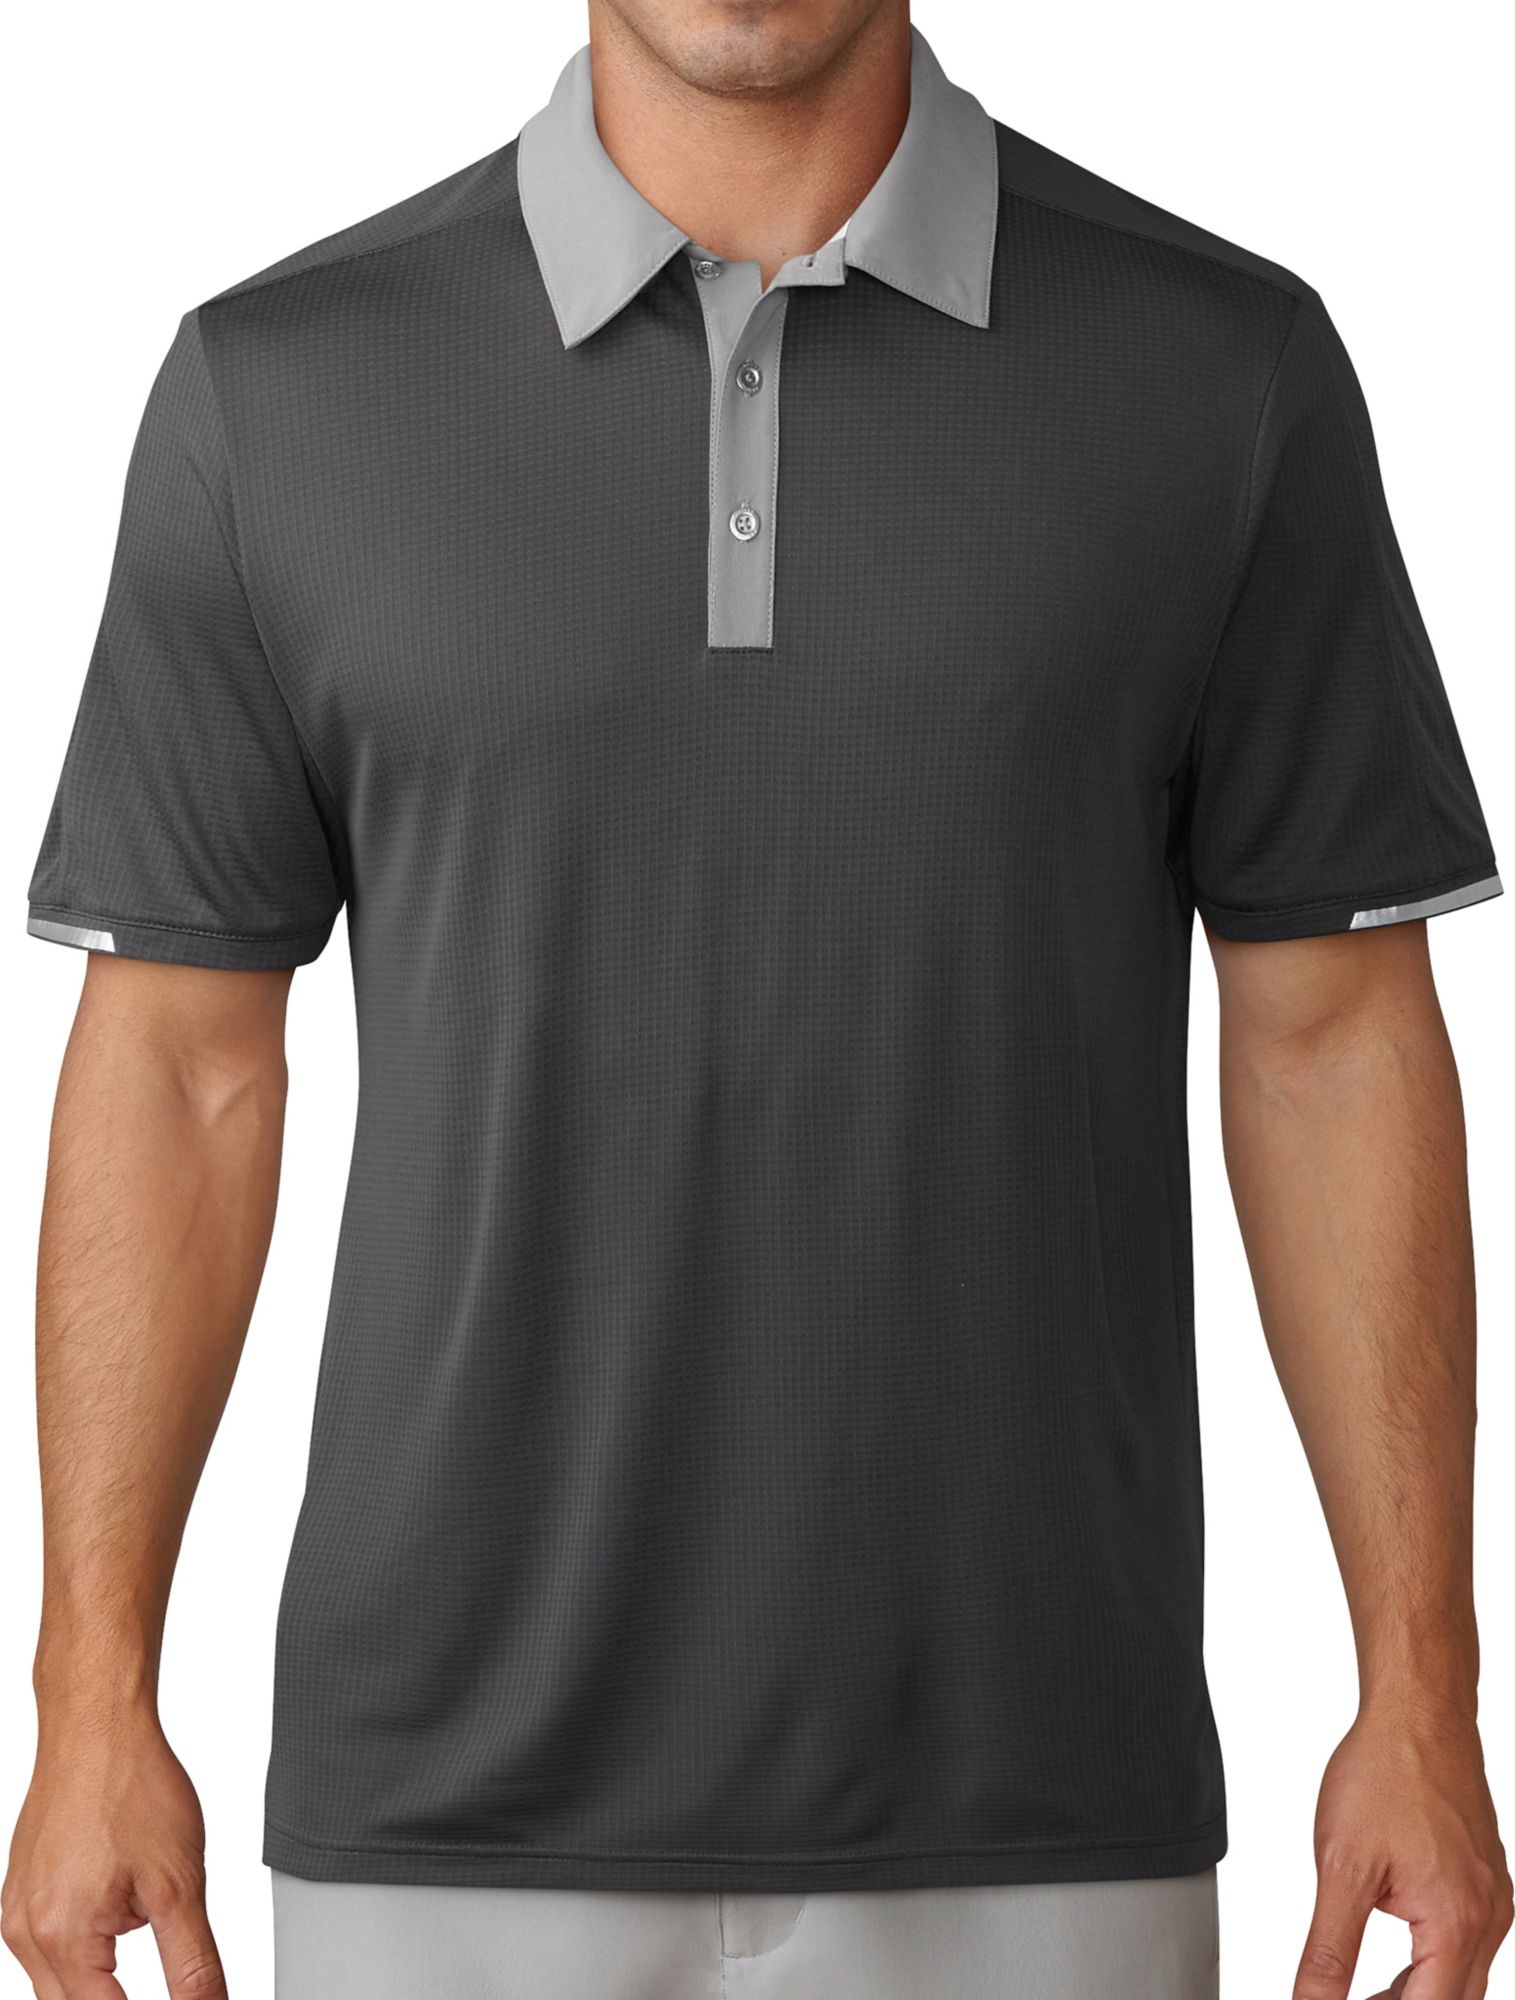 adidas Mens climachill Iconic Golf Polo